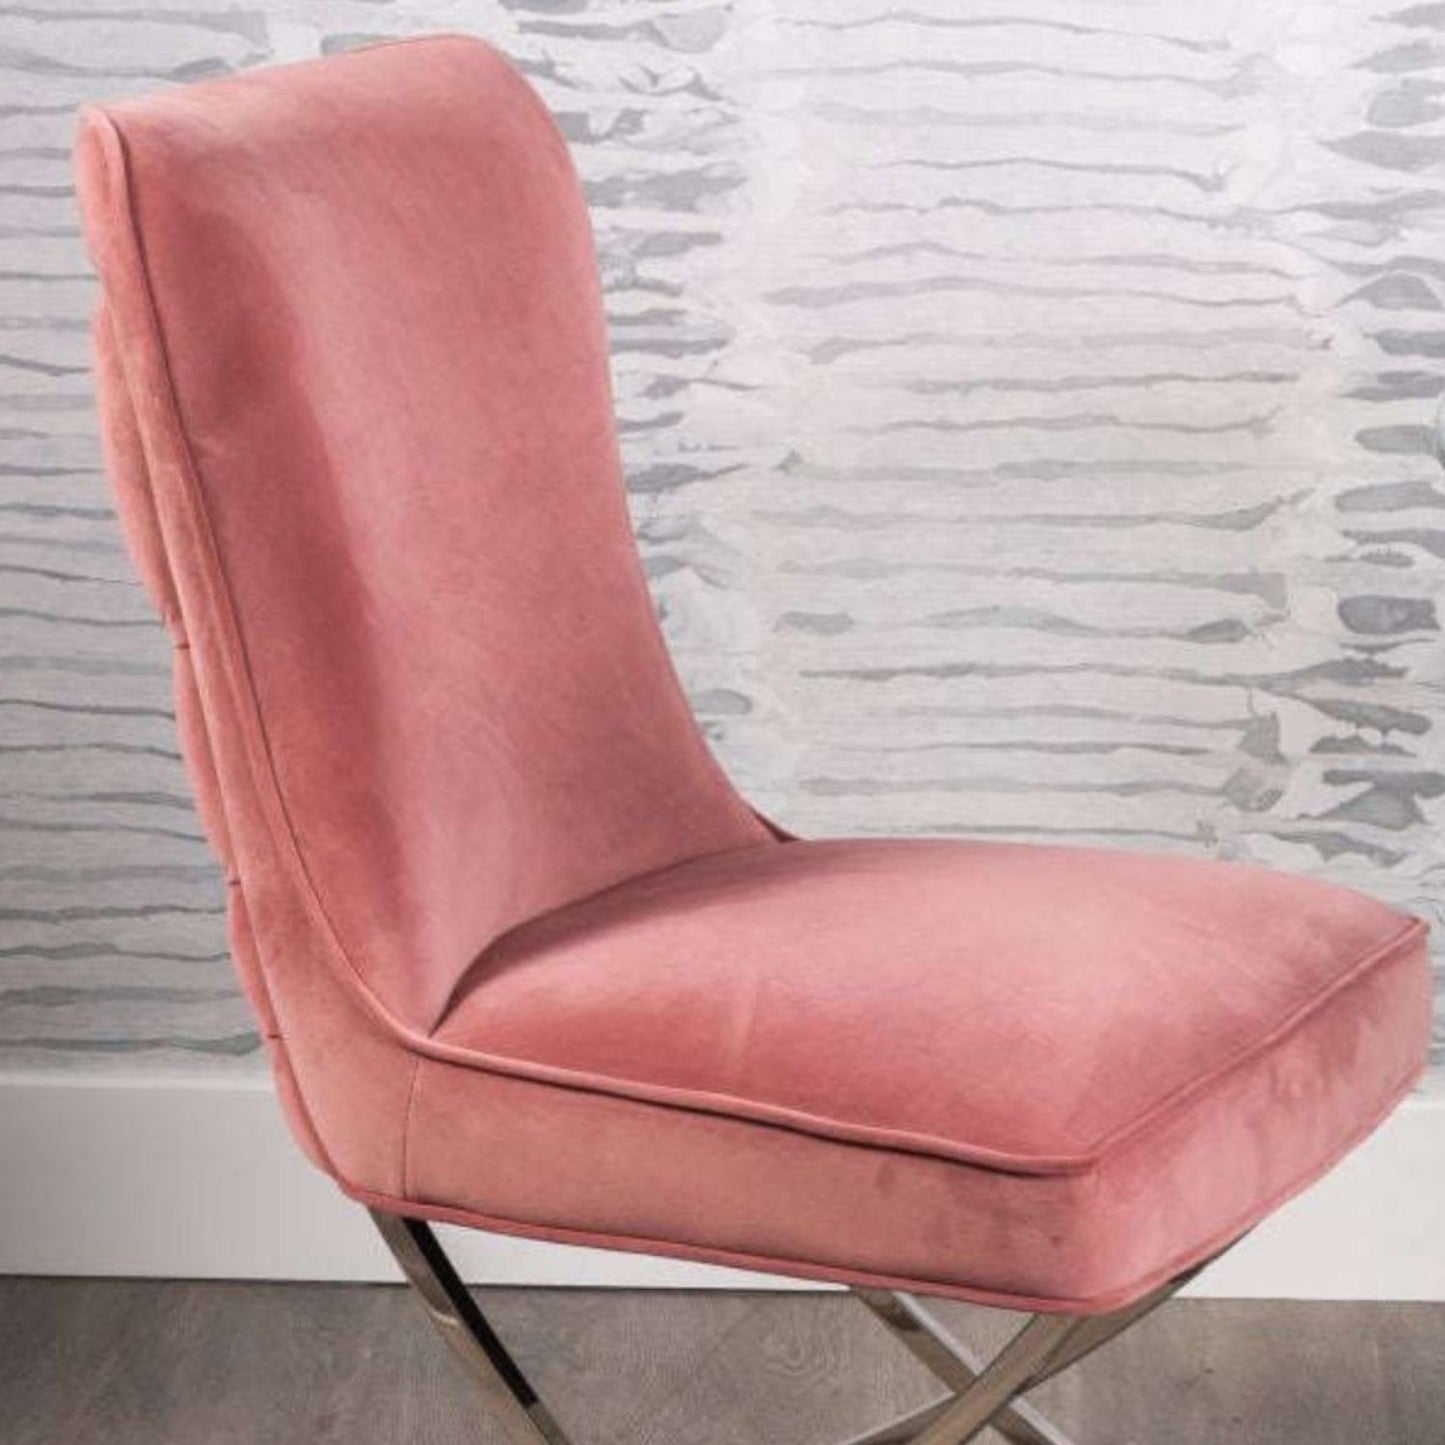 Pair of pink buttoned dining chairs with curved silver legs